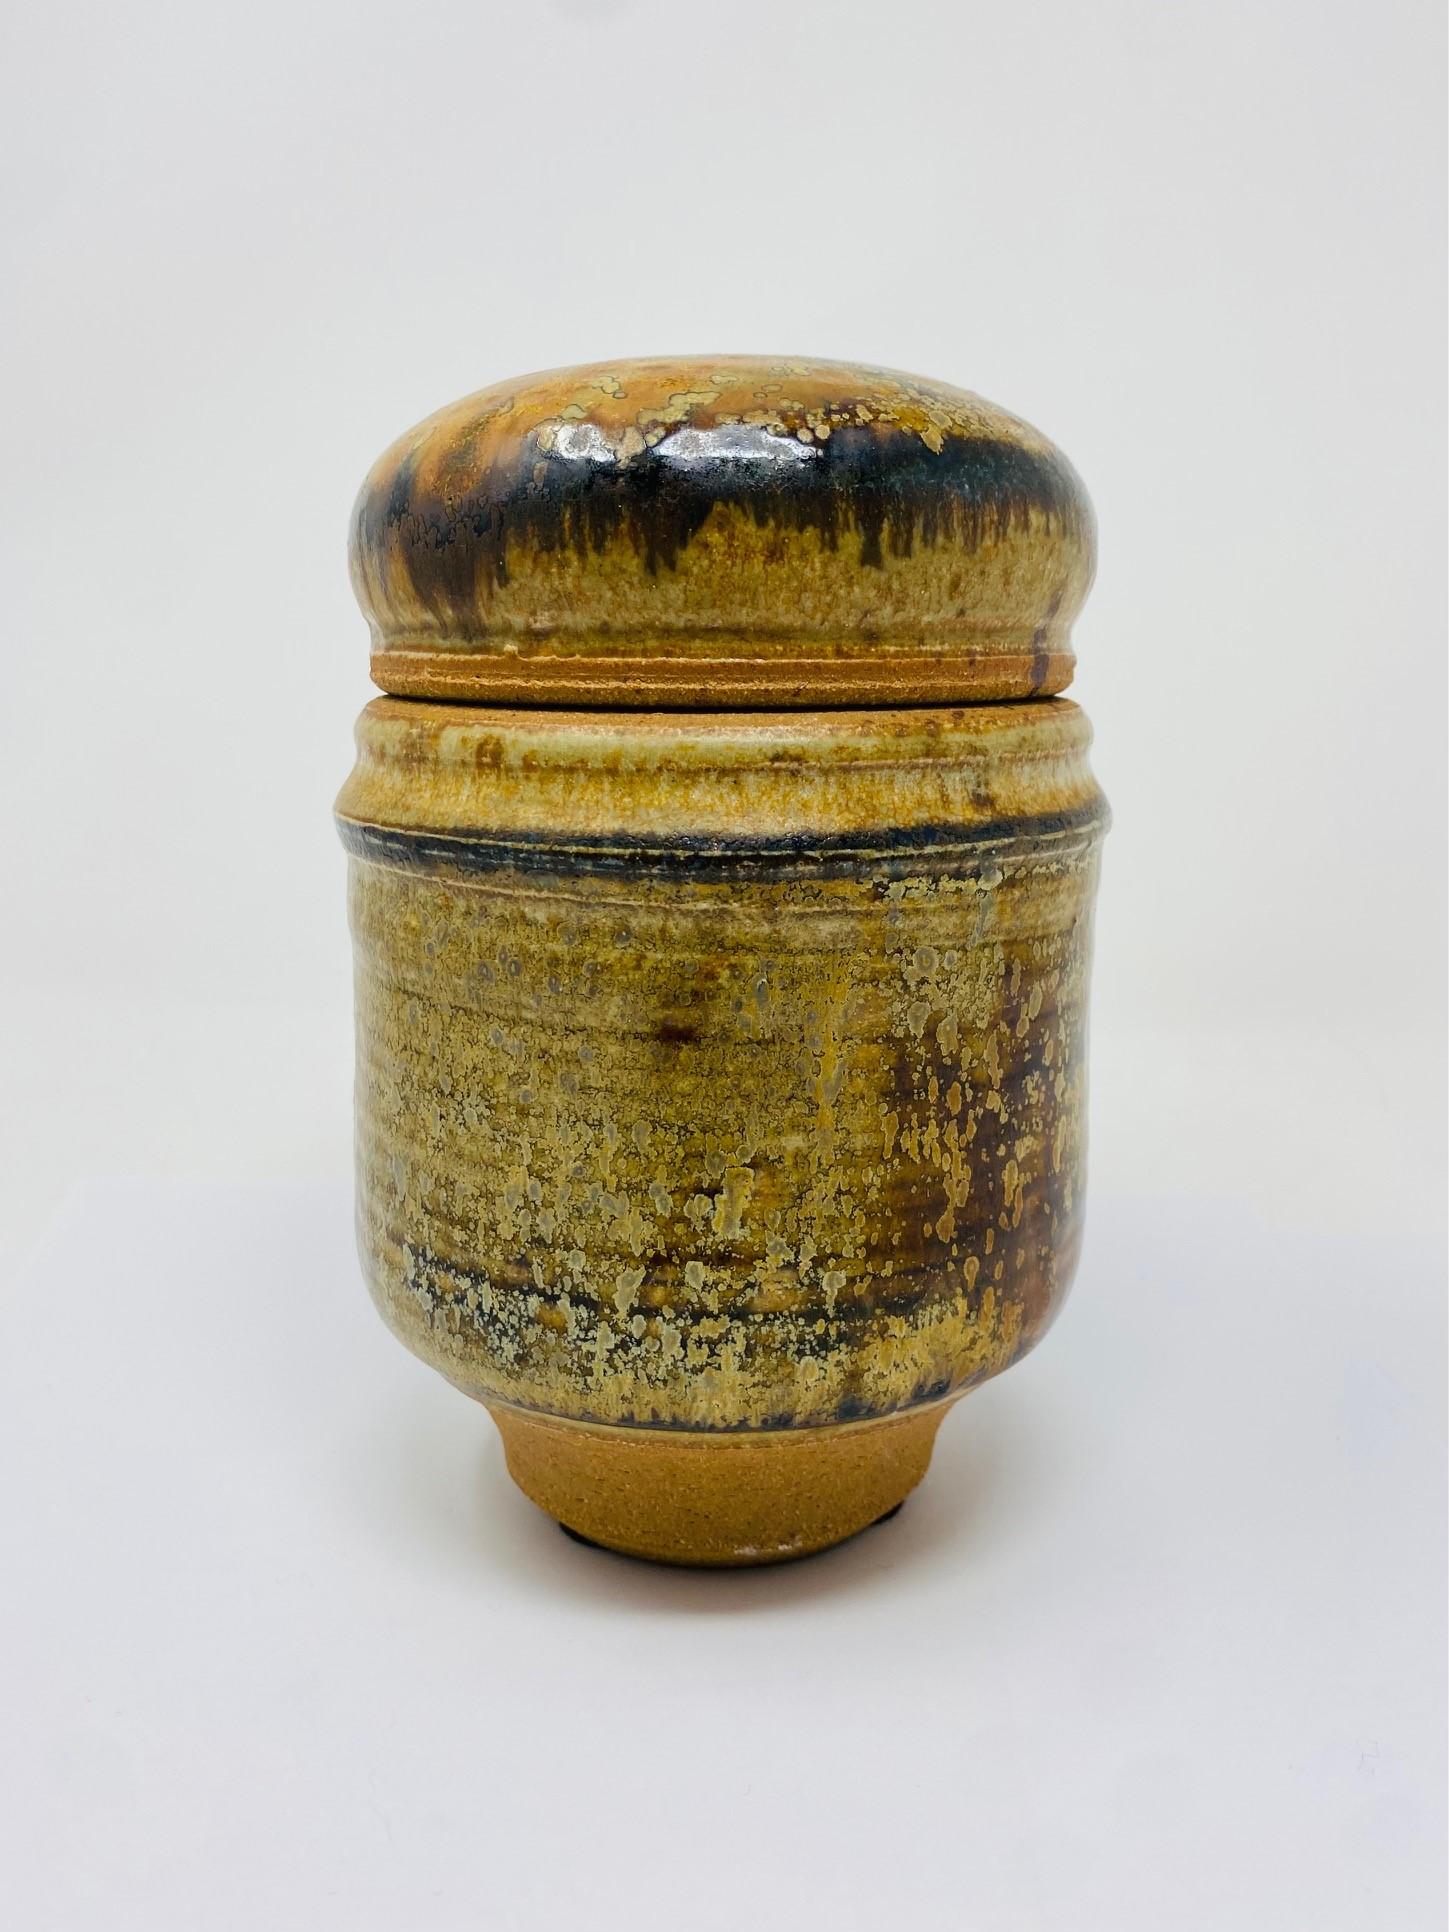 Incredible Mid-Century ceramic piece. Beautiful crafted ceramic jar with lid nice glaze and condition, no chips or cracks, classic California pottery circa 1970's.  Signature unknown.

Mid-Century, Hollywood Regency, Art Deco, Eclectic, Coastal,